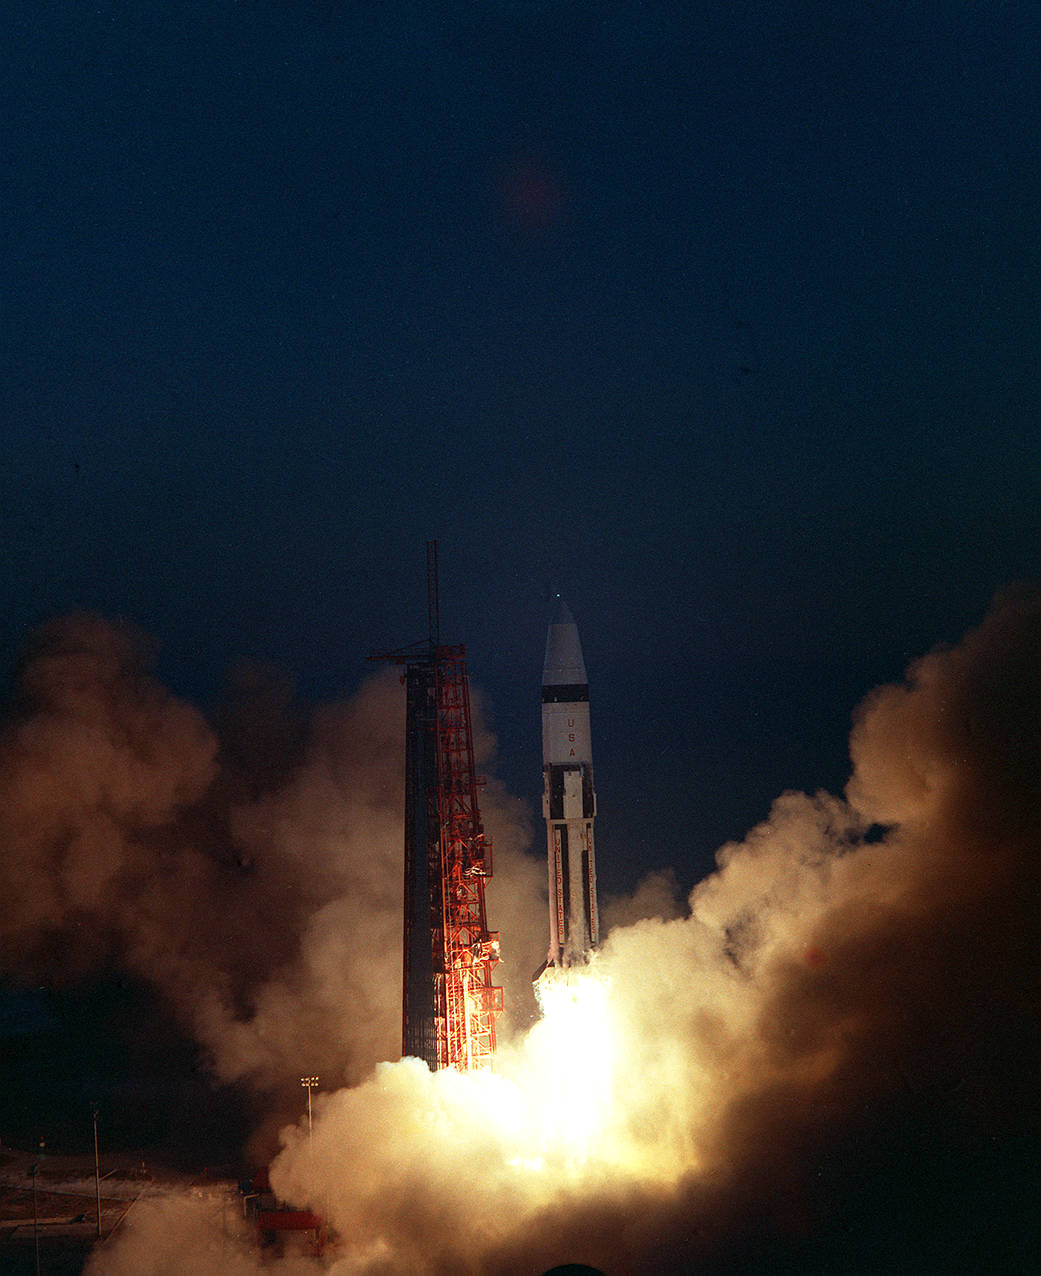 This week in 1968, Apollo 5 launched from NASA’s Kennedy Space Center. 